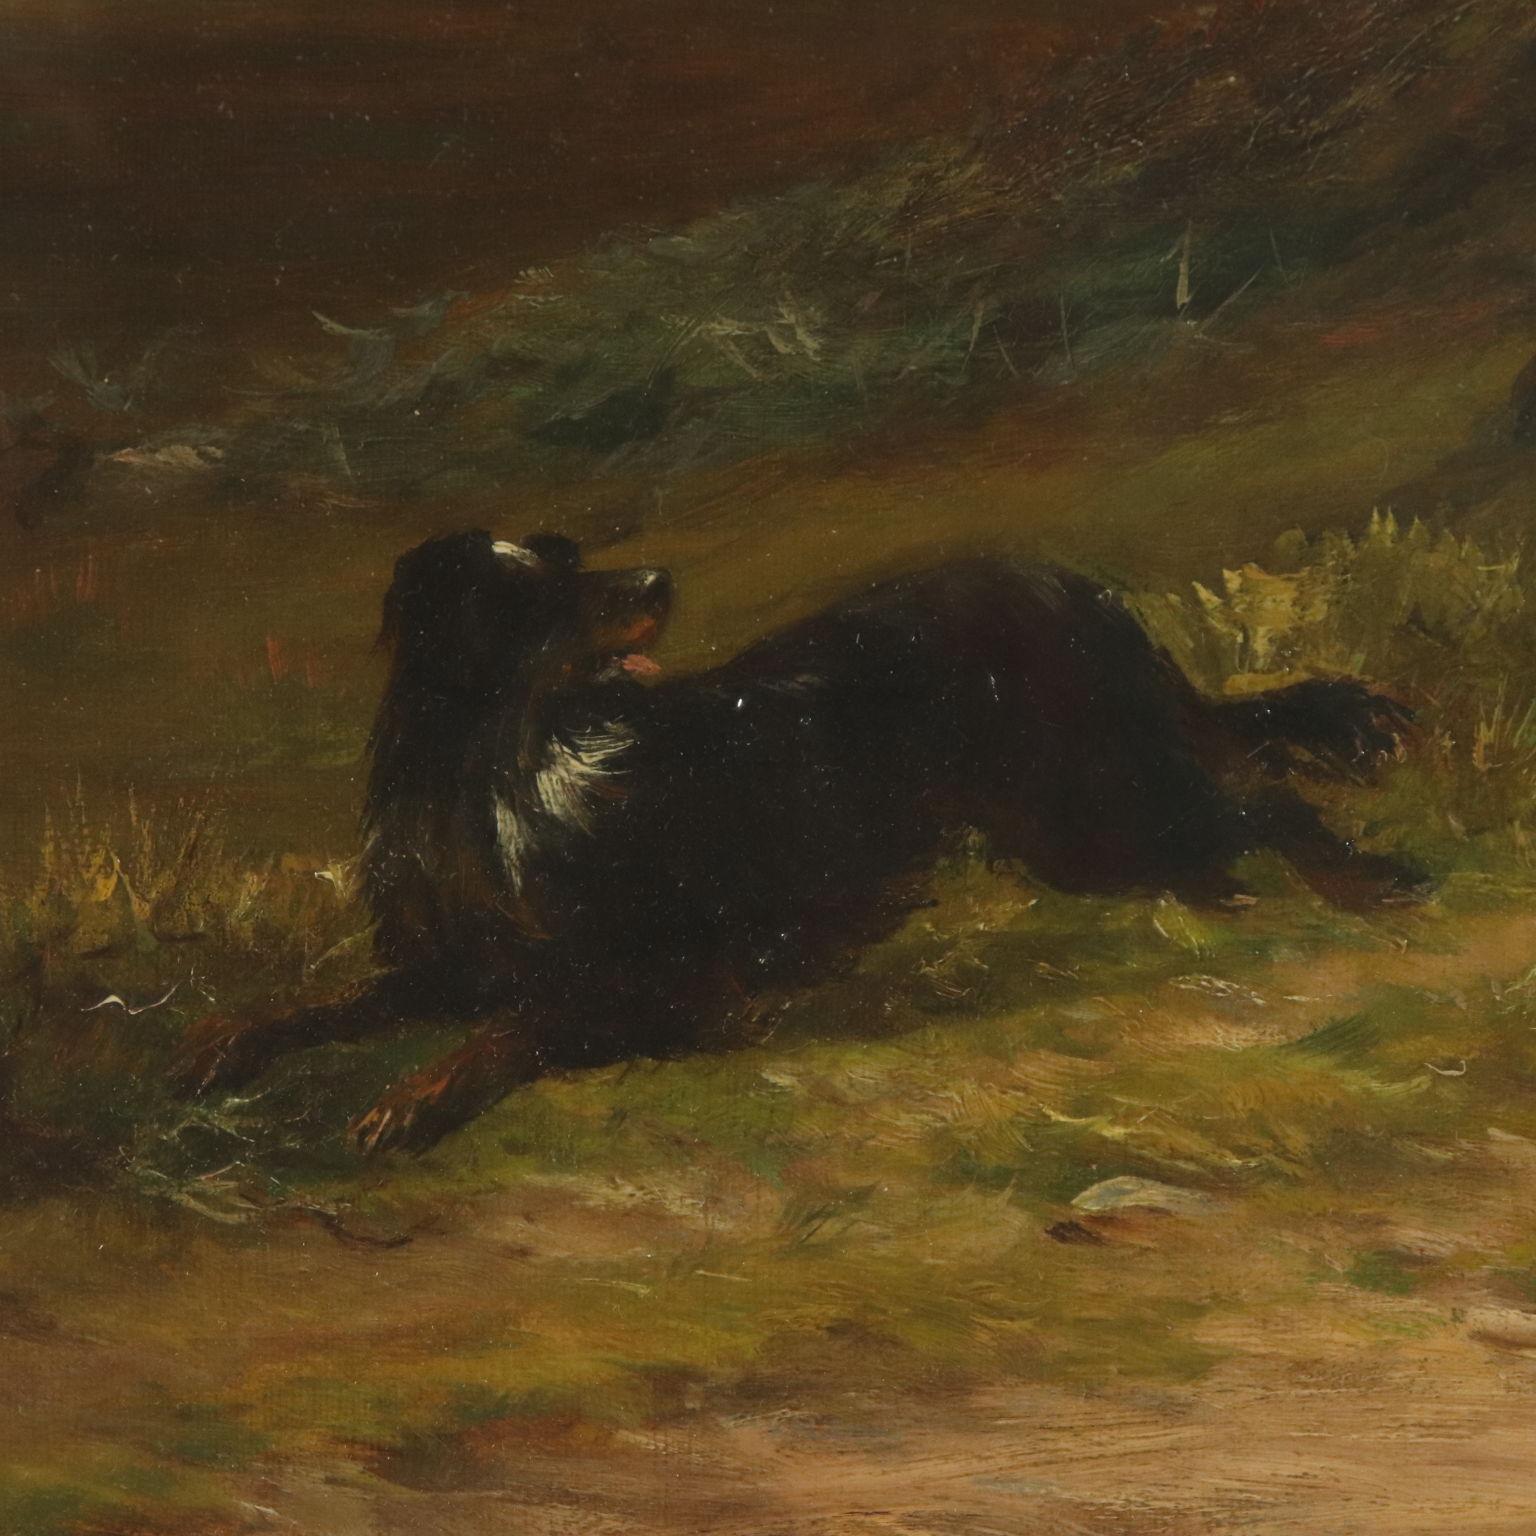 Louis Bosworth Hurt Grazing Cows in Highlands Painting 1881 3